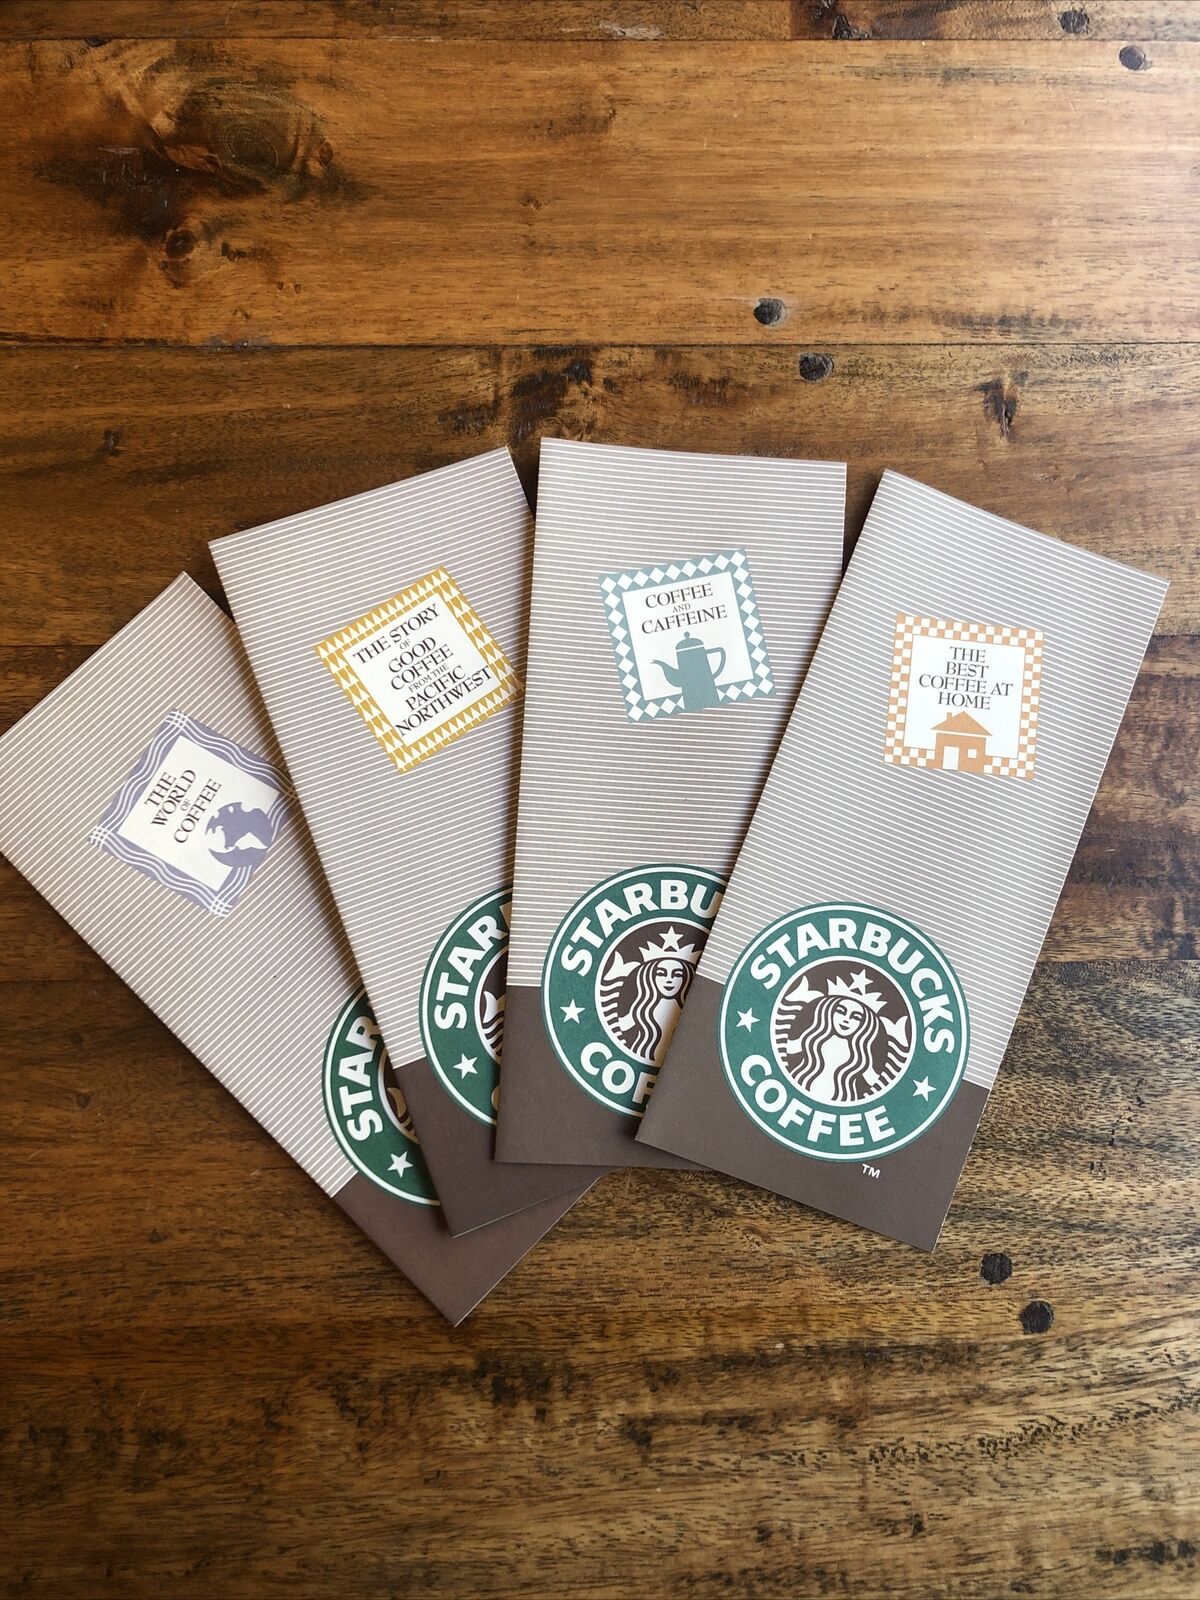 Vintage Starbucks Pamphlets - BEAUTIFUL Fold-Outs - Early 1990s